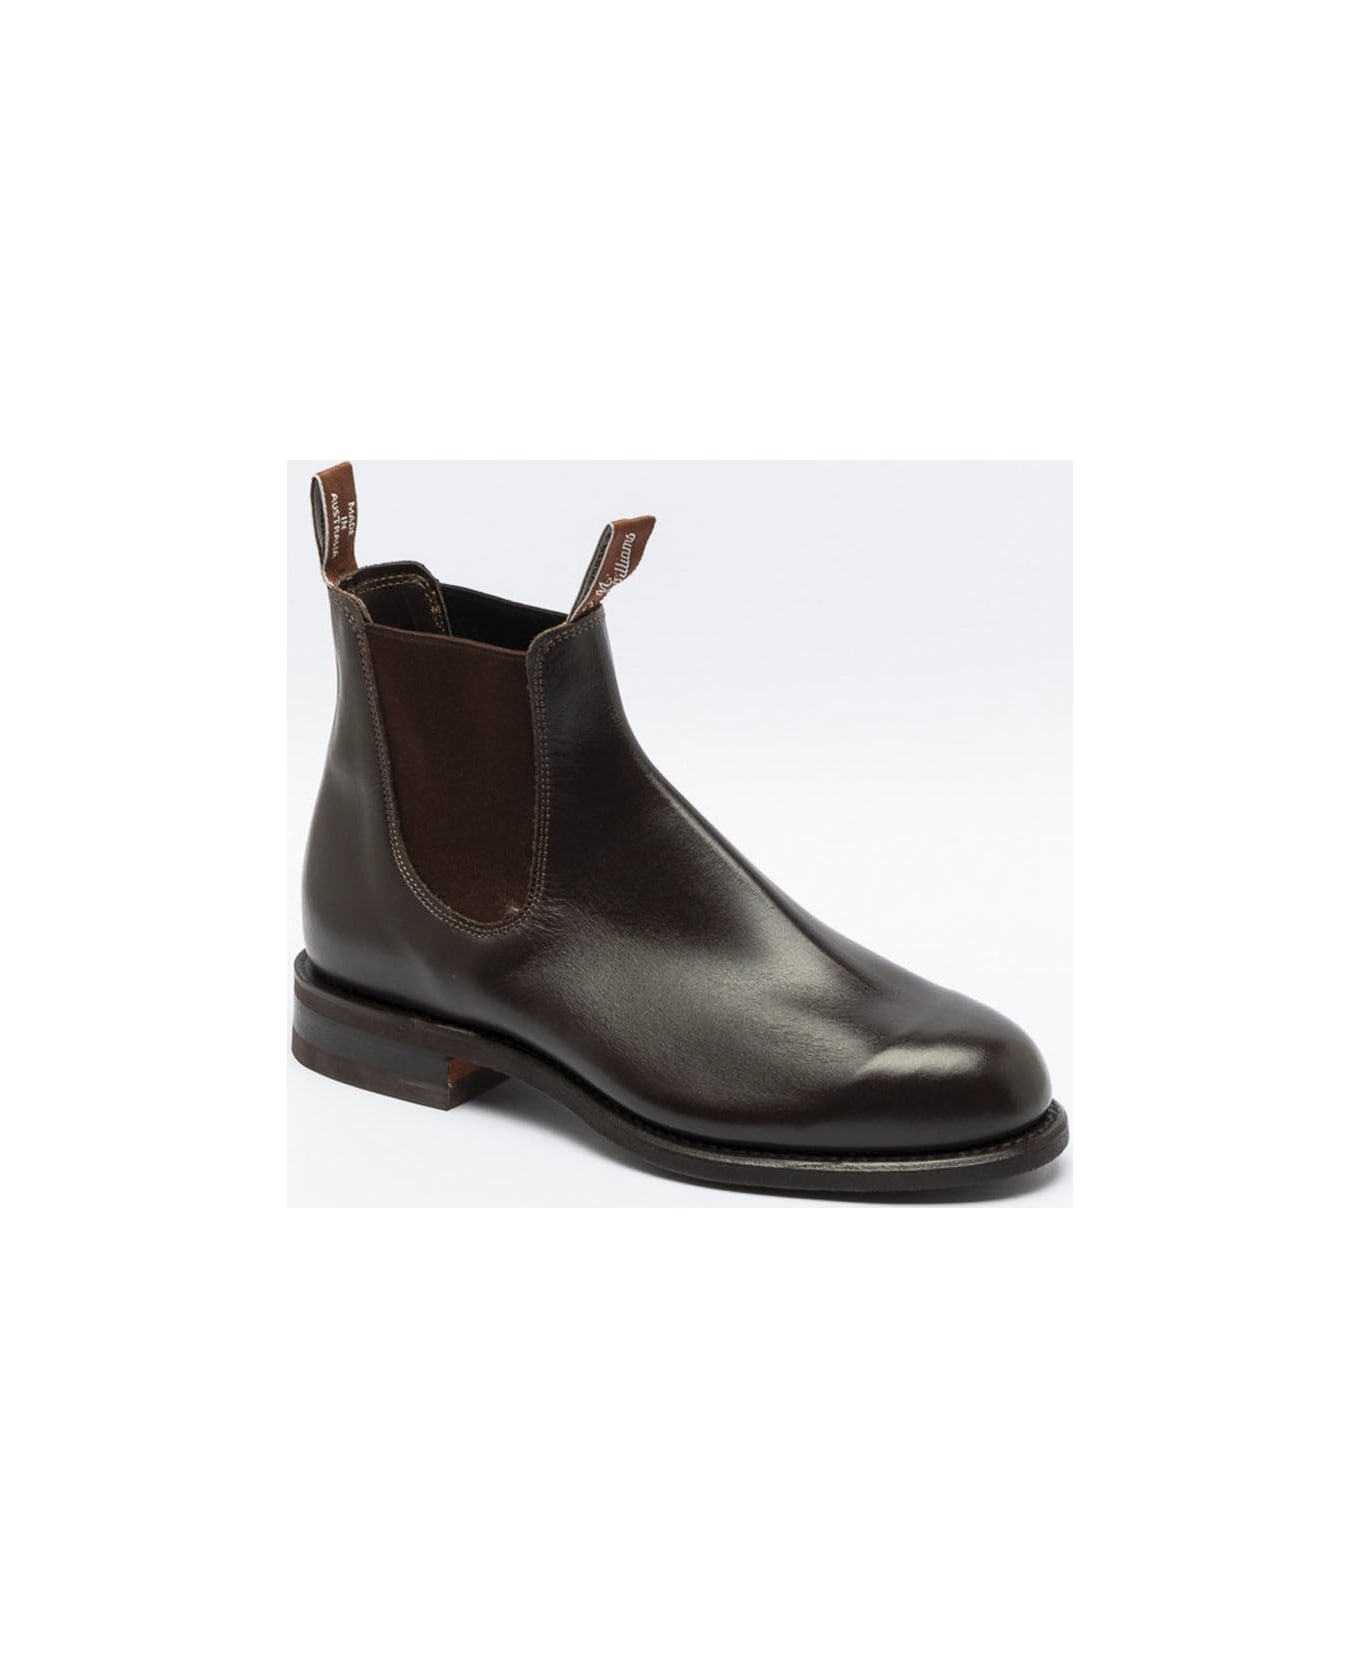 R.M.Williams Comfort Turnout Chestnut Yearling Leather Chelsea Boot - Marrone